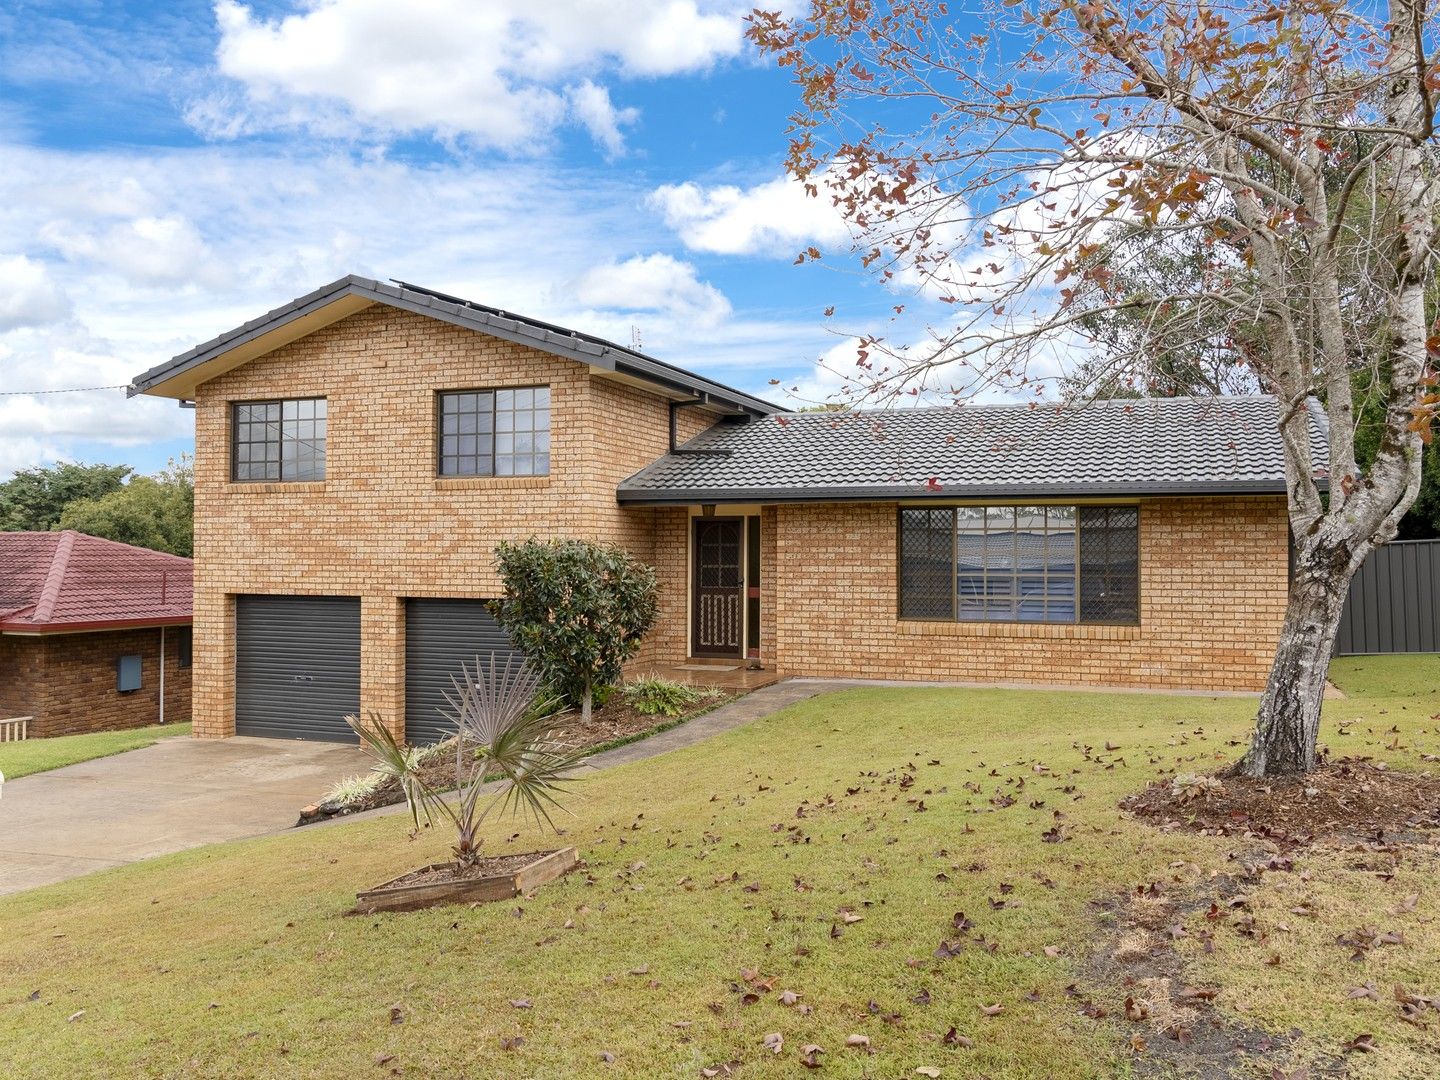 4 bedrooms House in 27 Pearce Avenue GOONELLABAH NSW, 2480